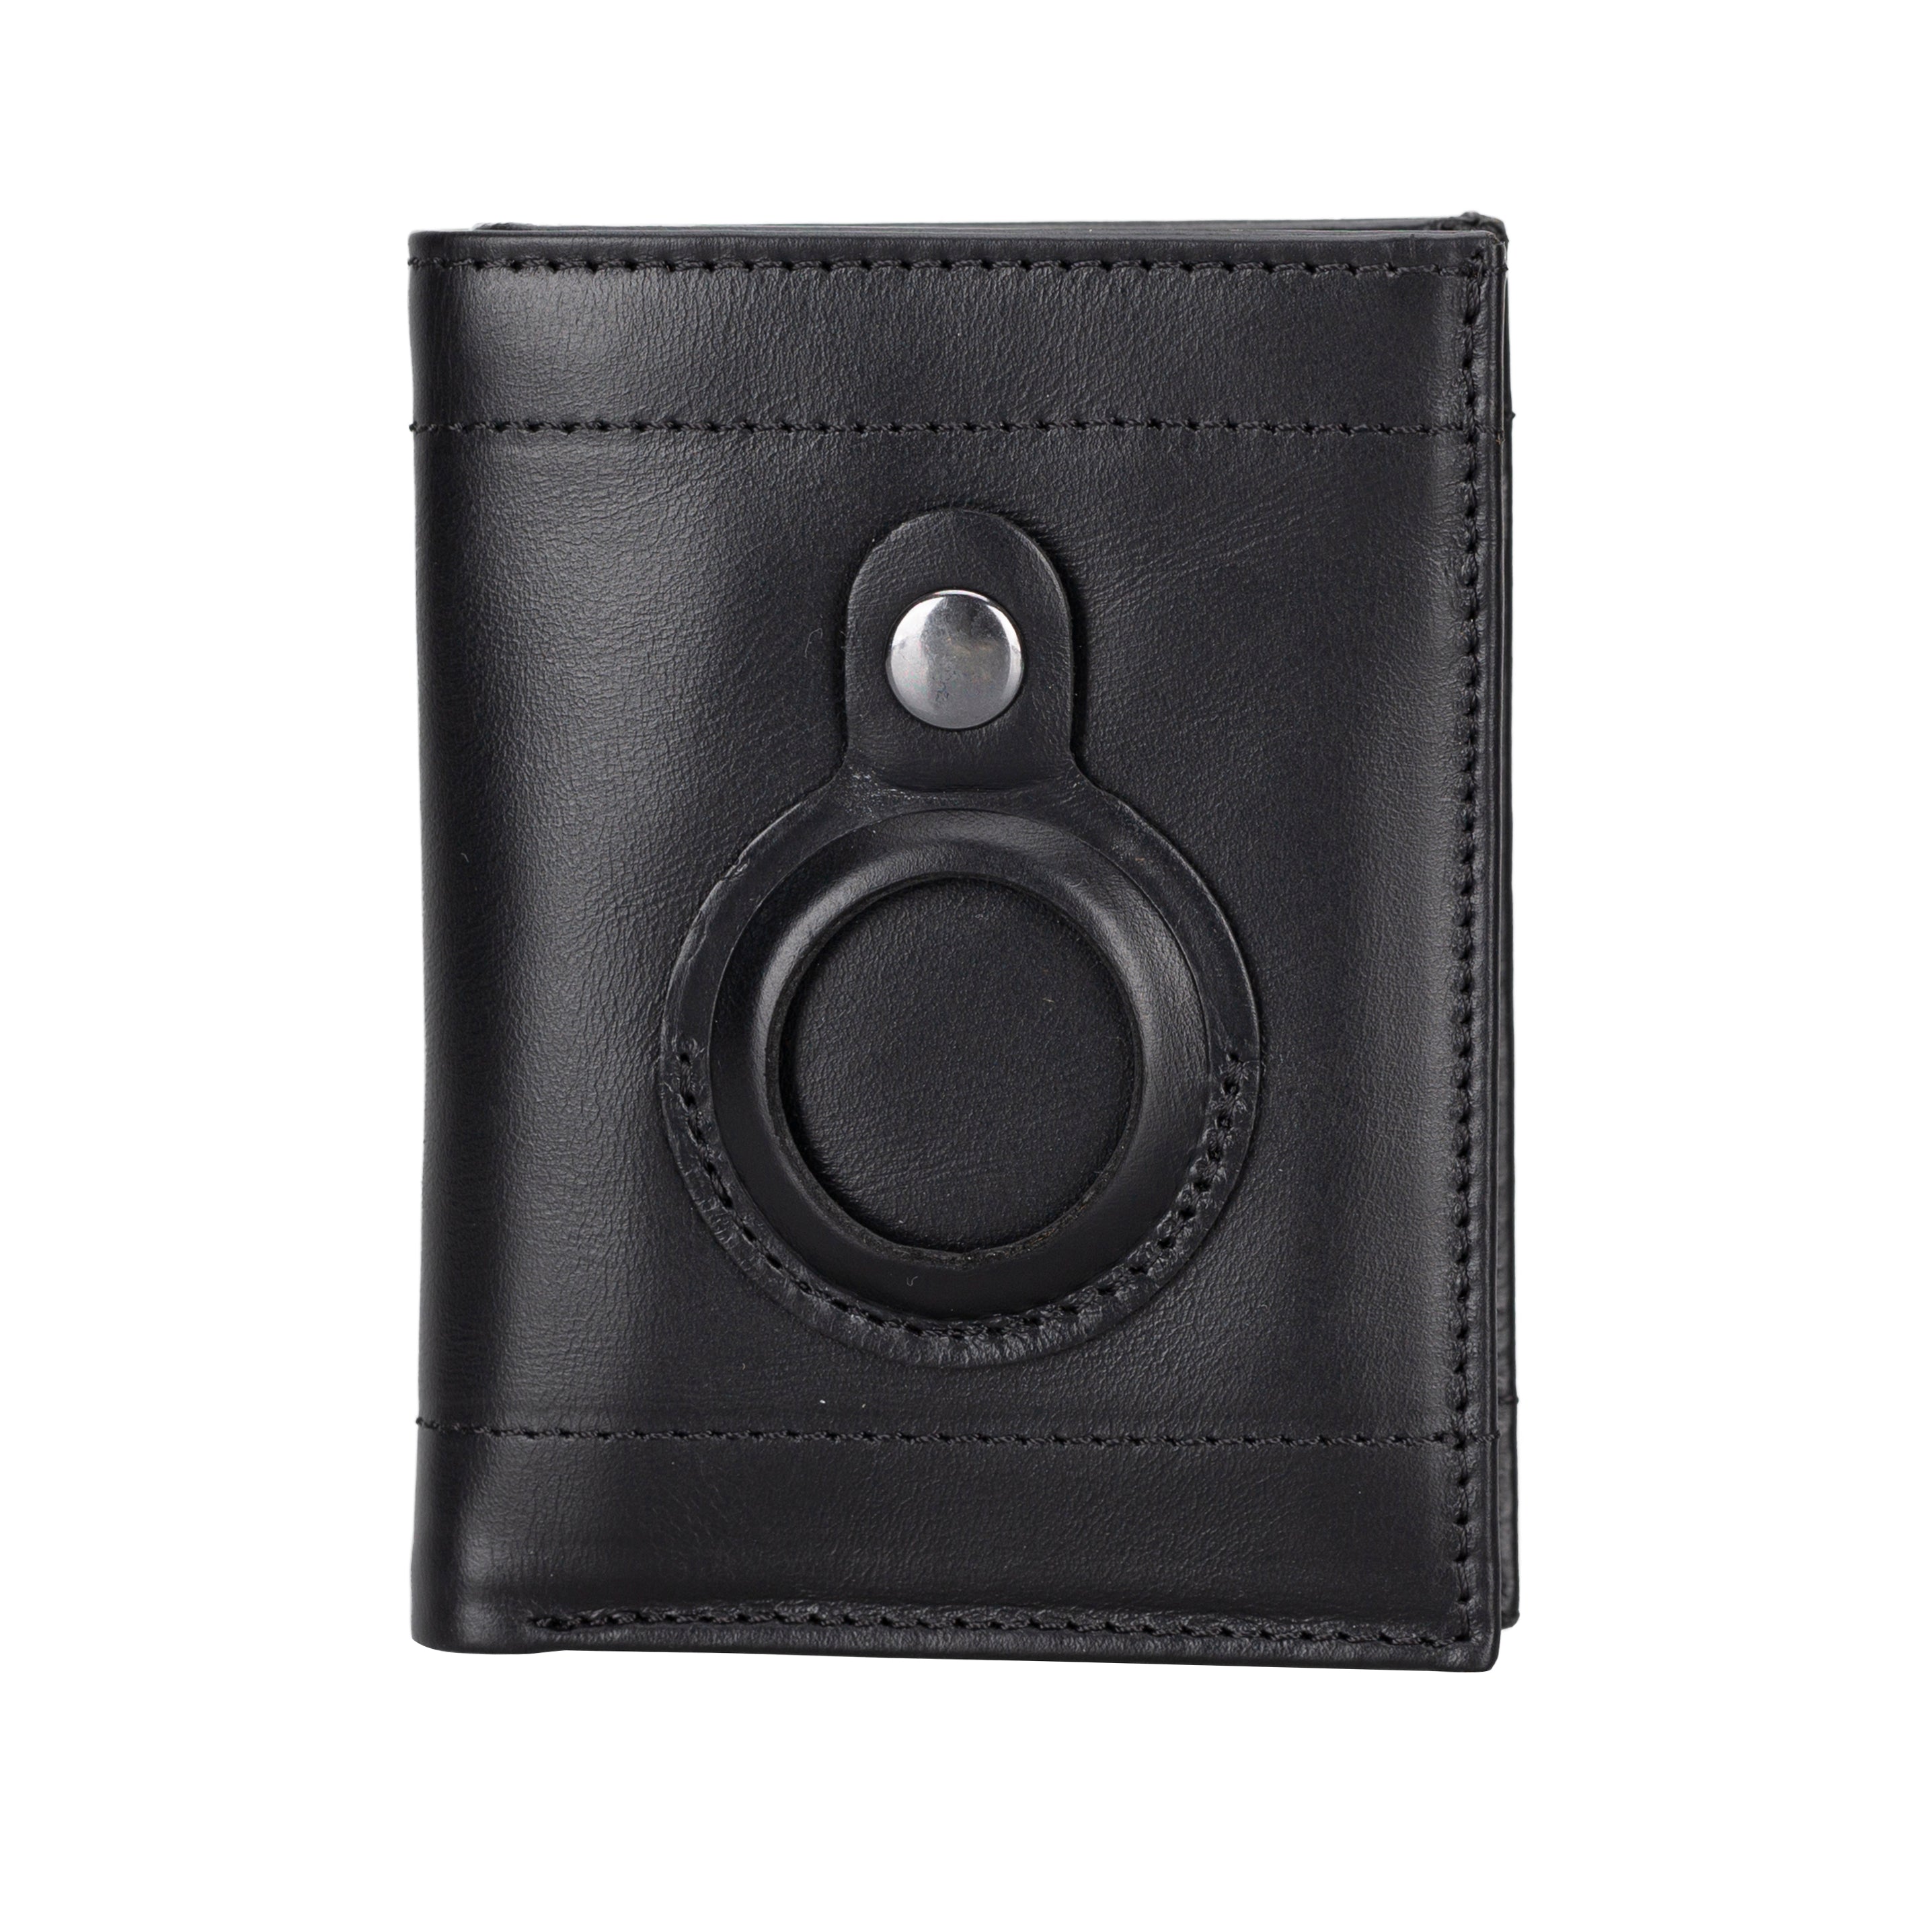 Airmaka Leather Wallet